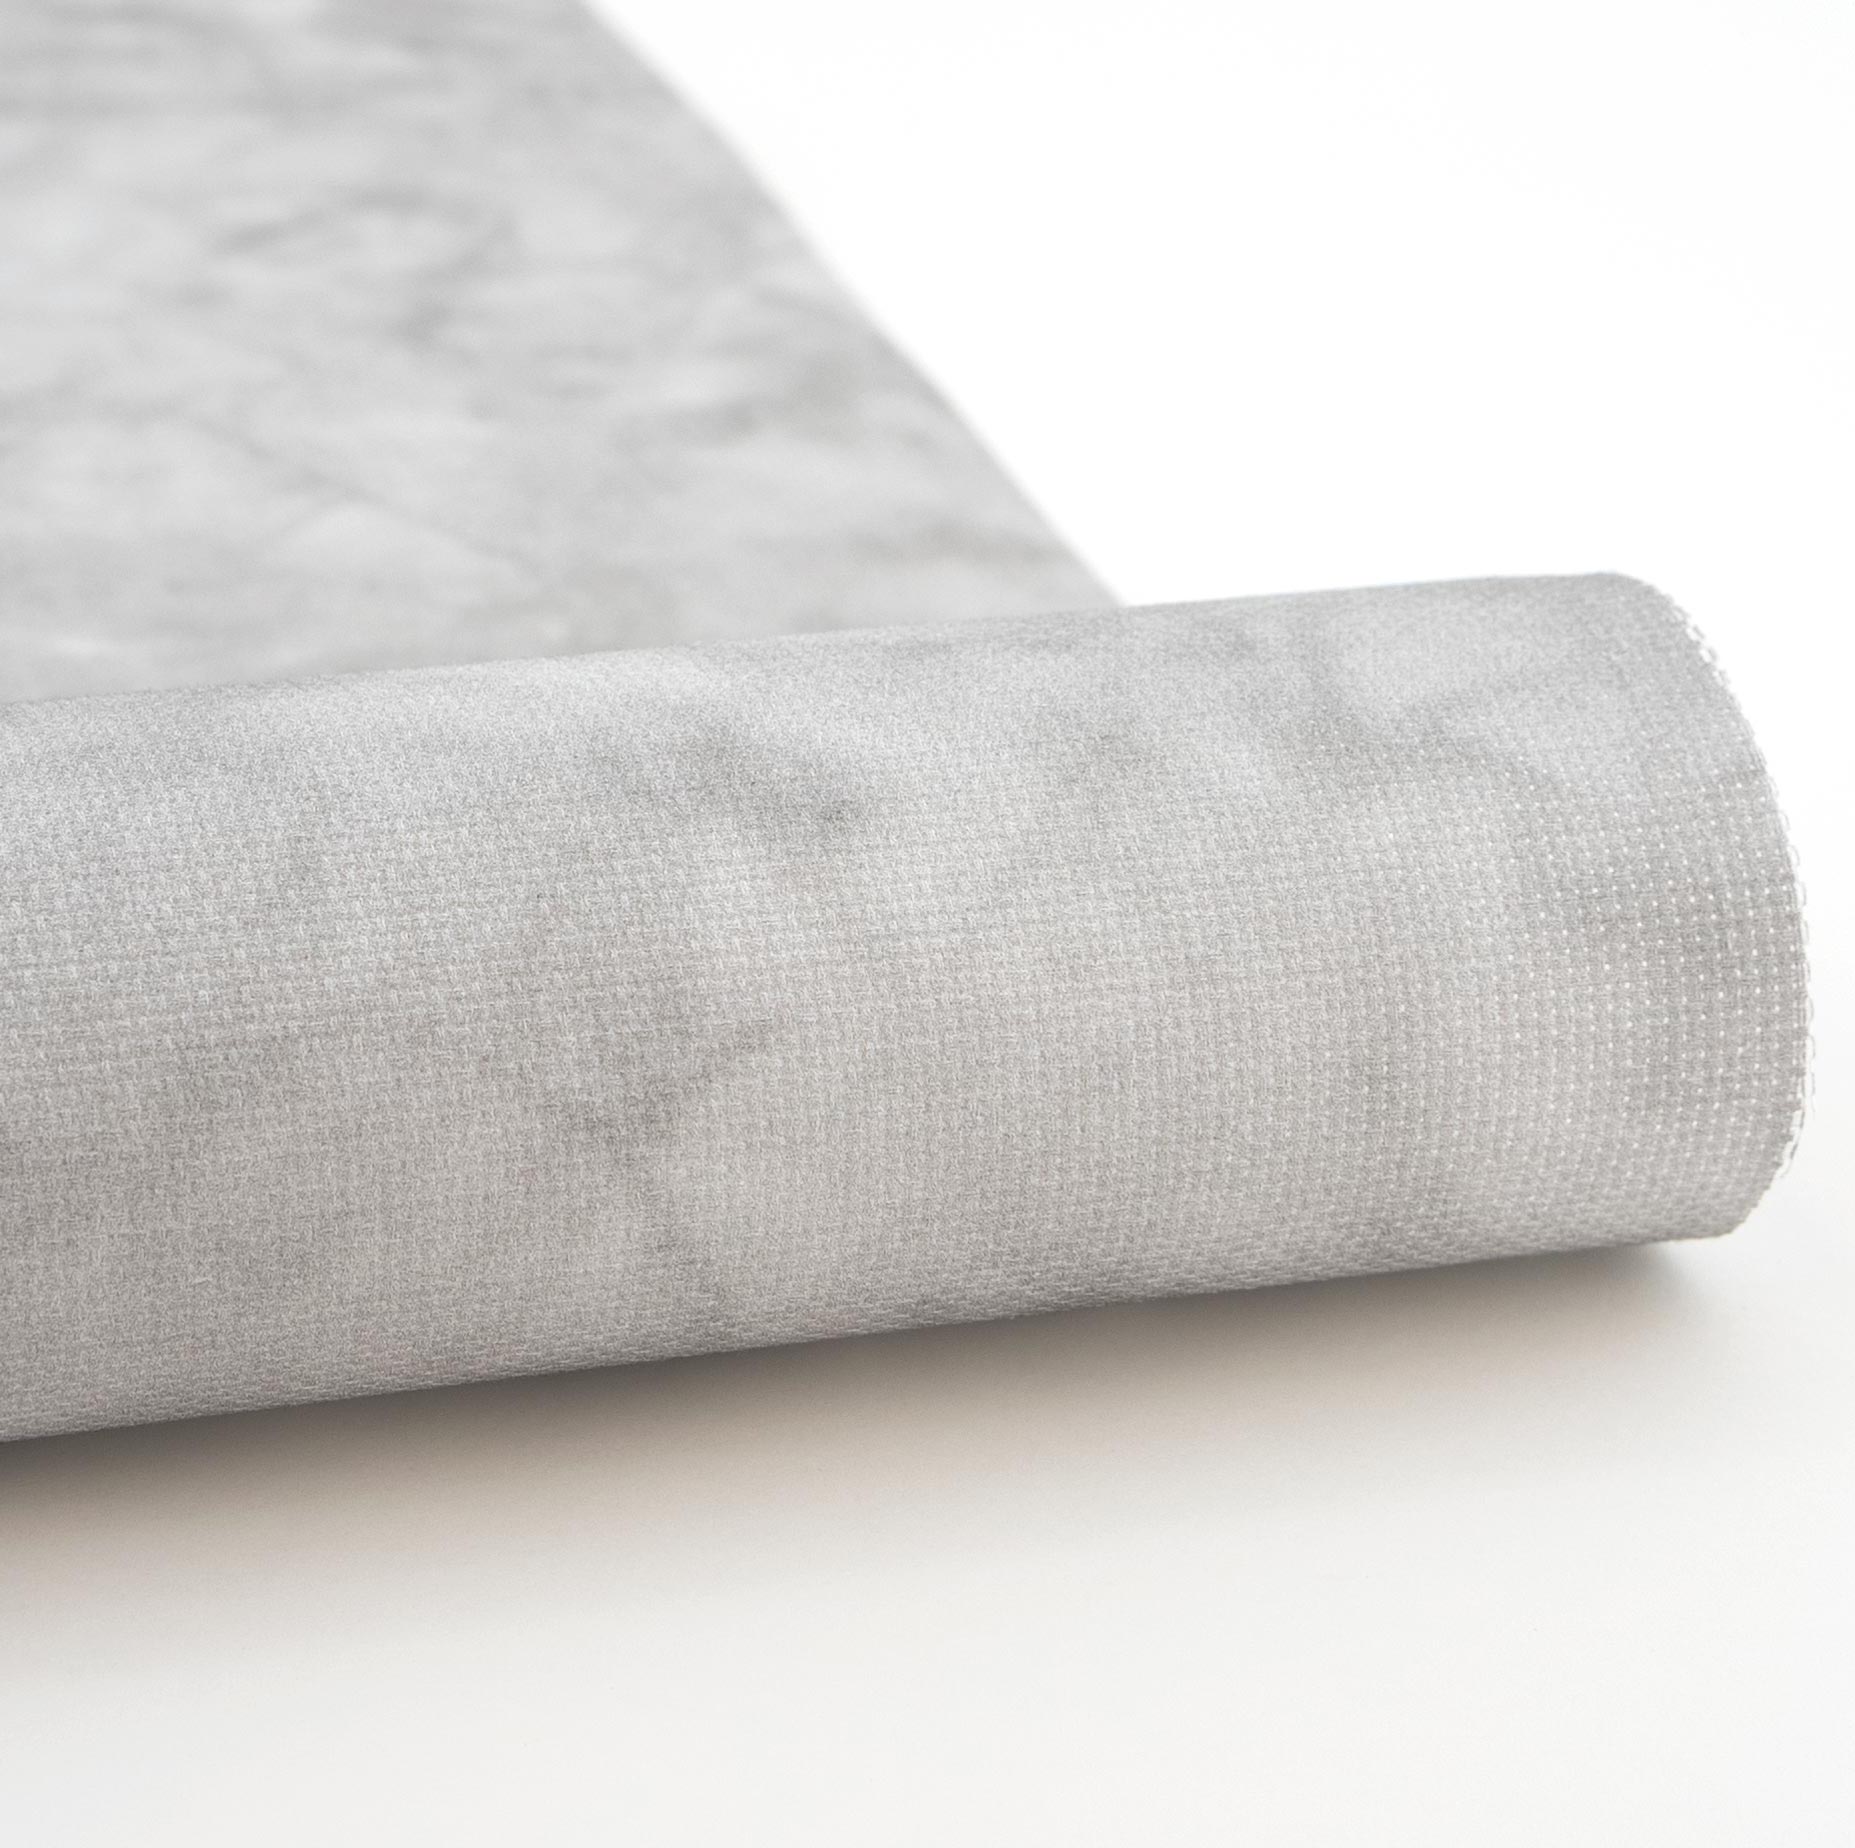 Gray Synthetic Variegated Fabric for Sewing Clothes, Fabric Wrinkled Stock  Image - Image of decor, design: 214386873